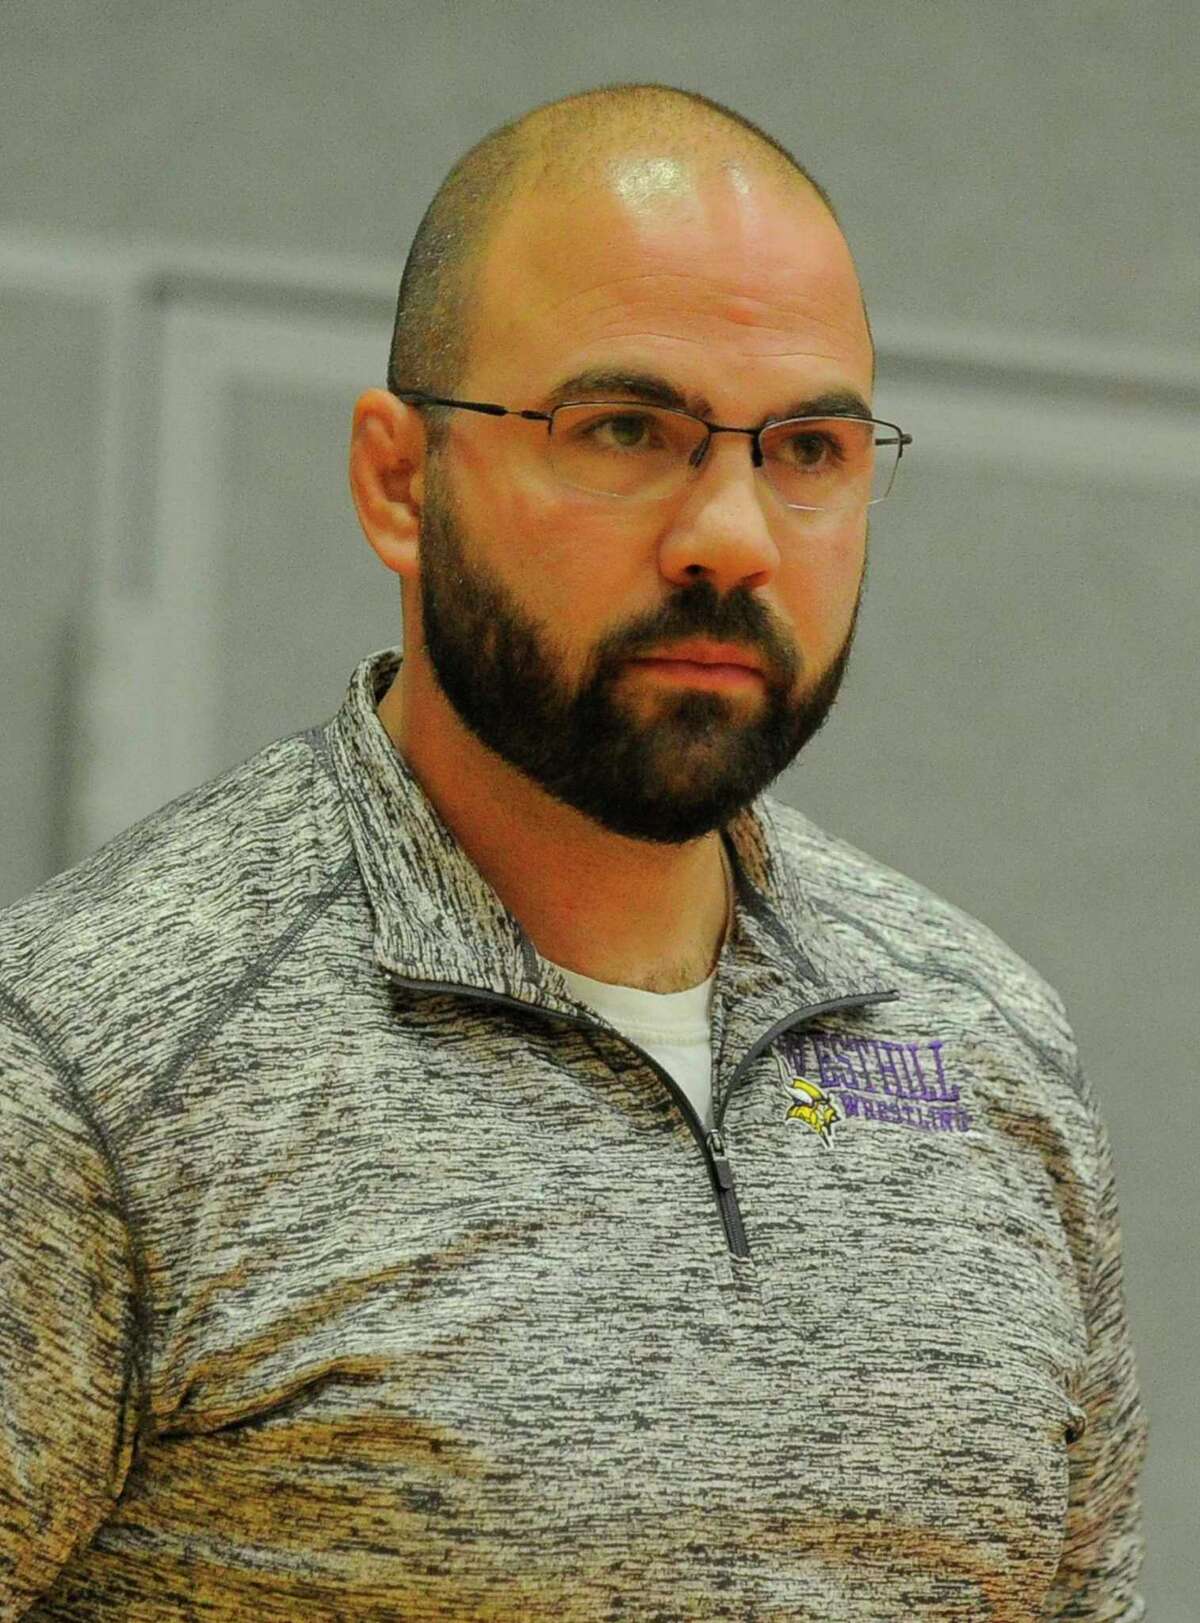 Tom Pereira Westhill Wrestling Coach File image from Feb. 1, 2017